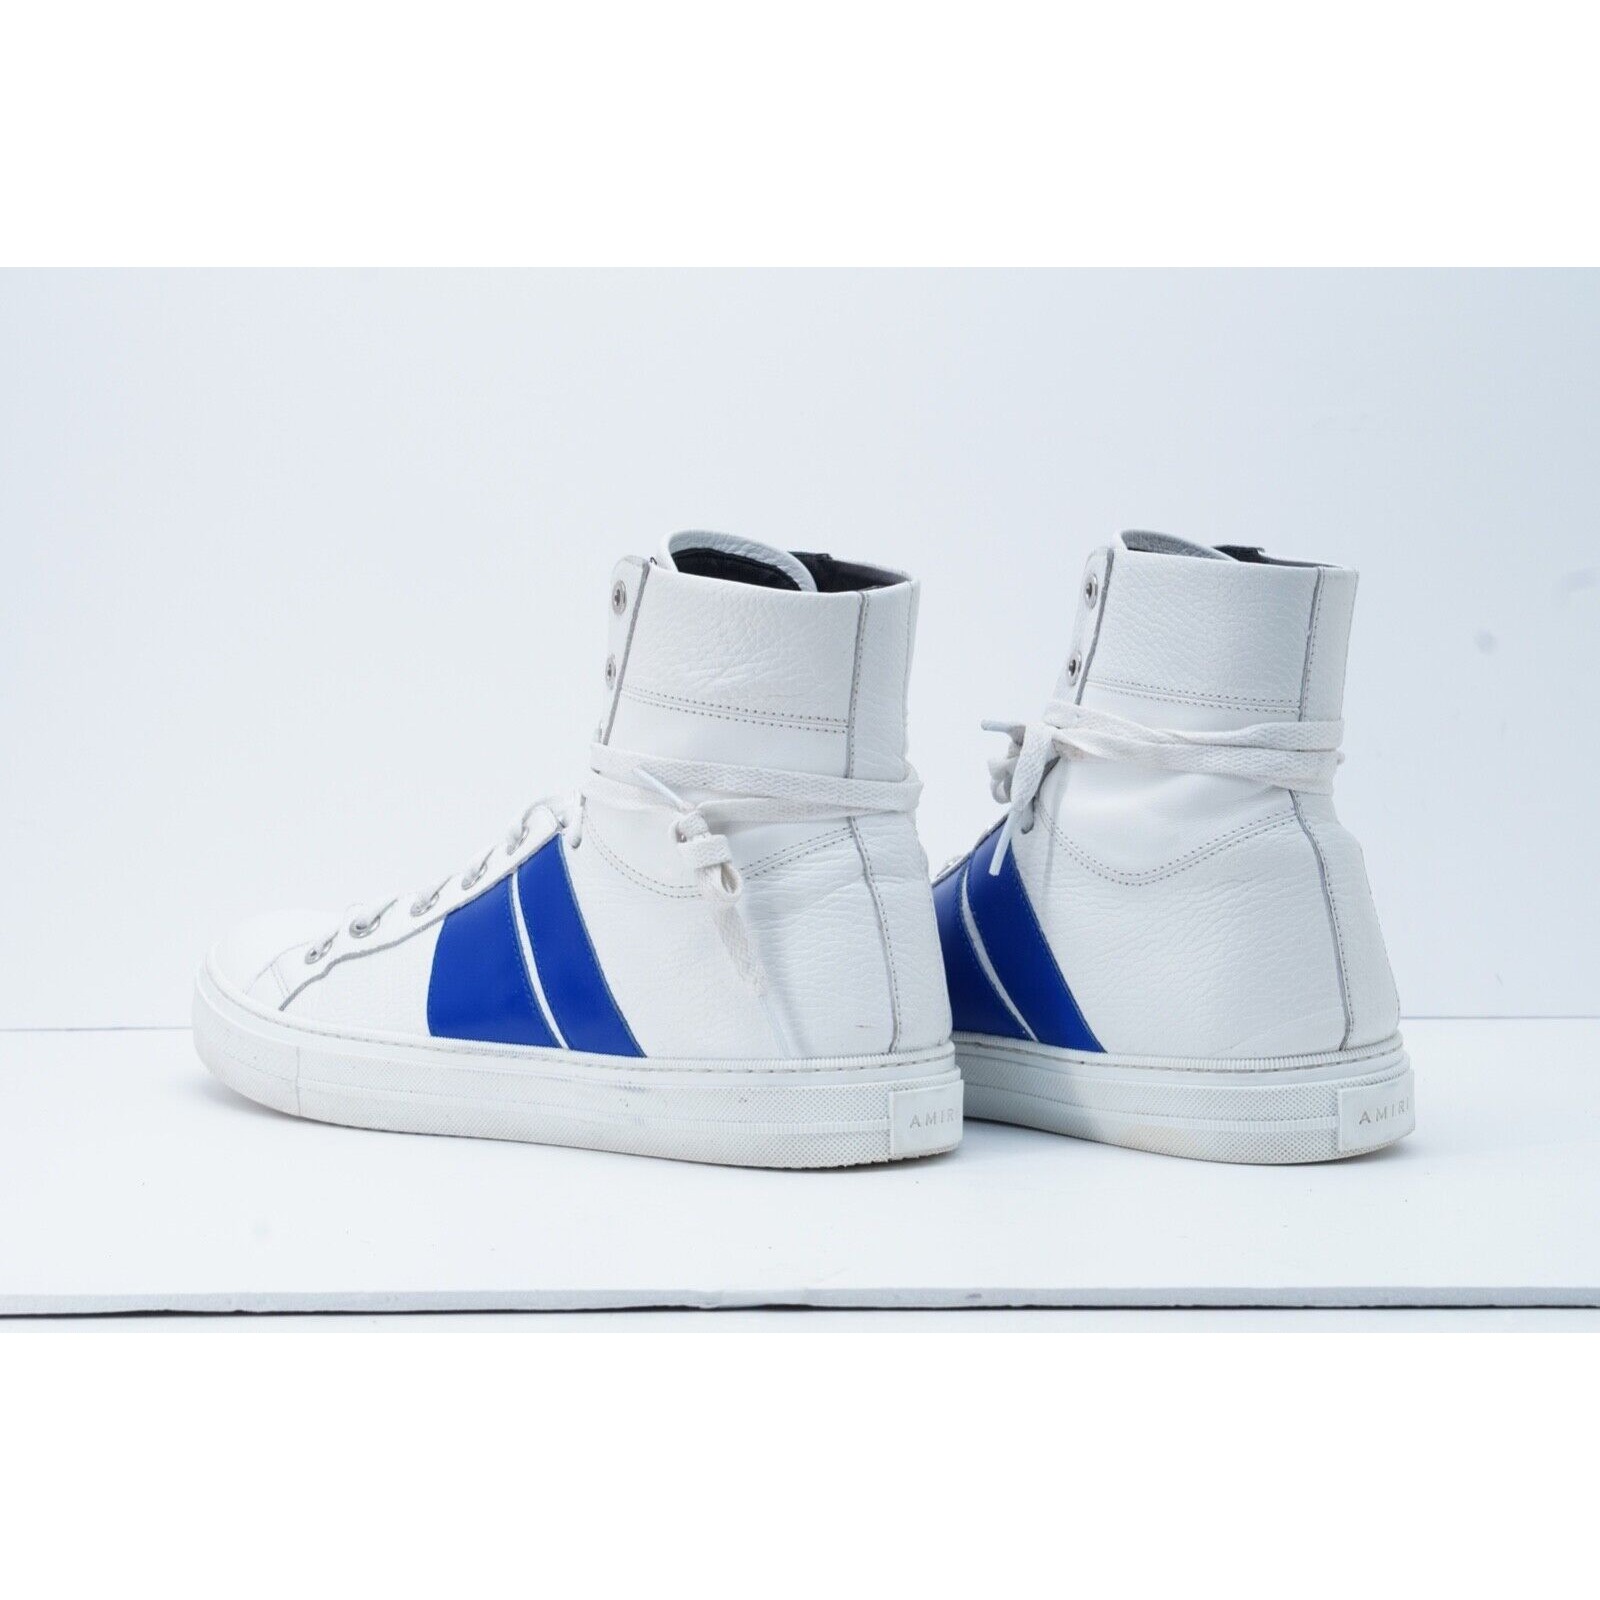 Amiri Sunset Sneakers White Blue High Top Lace Up $595 - Siz - 5